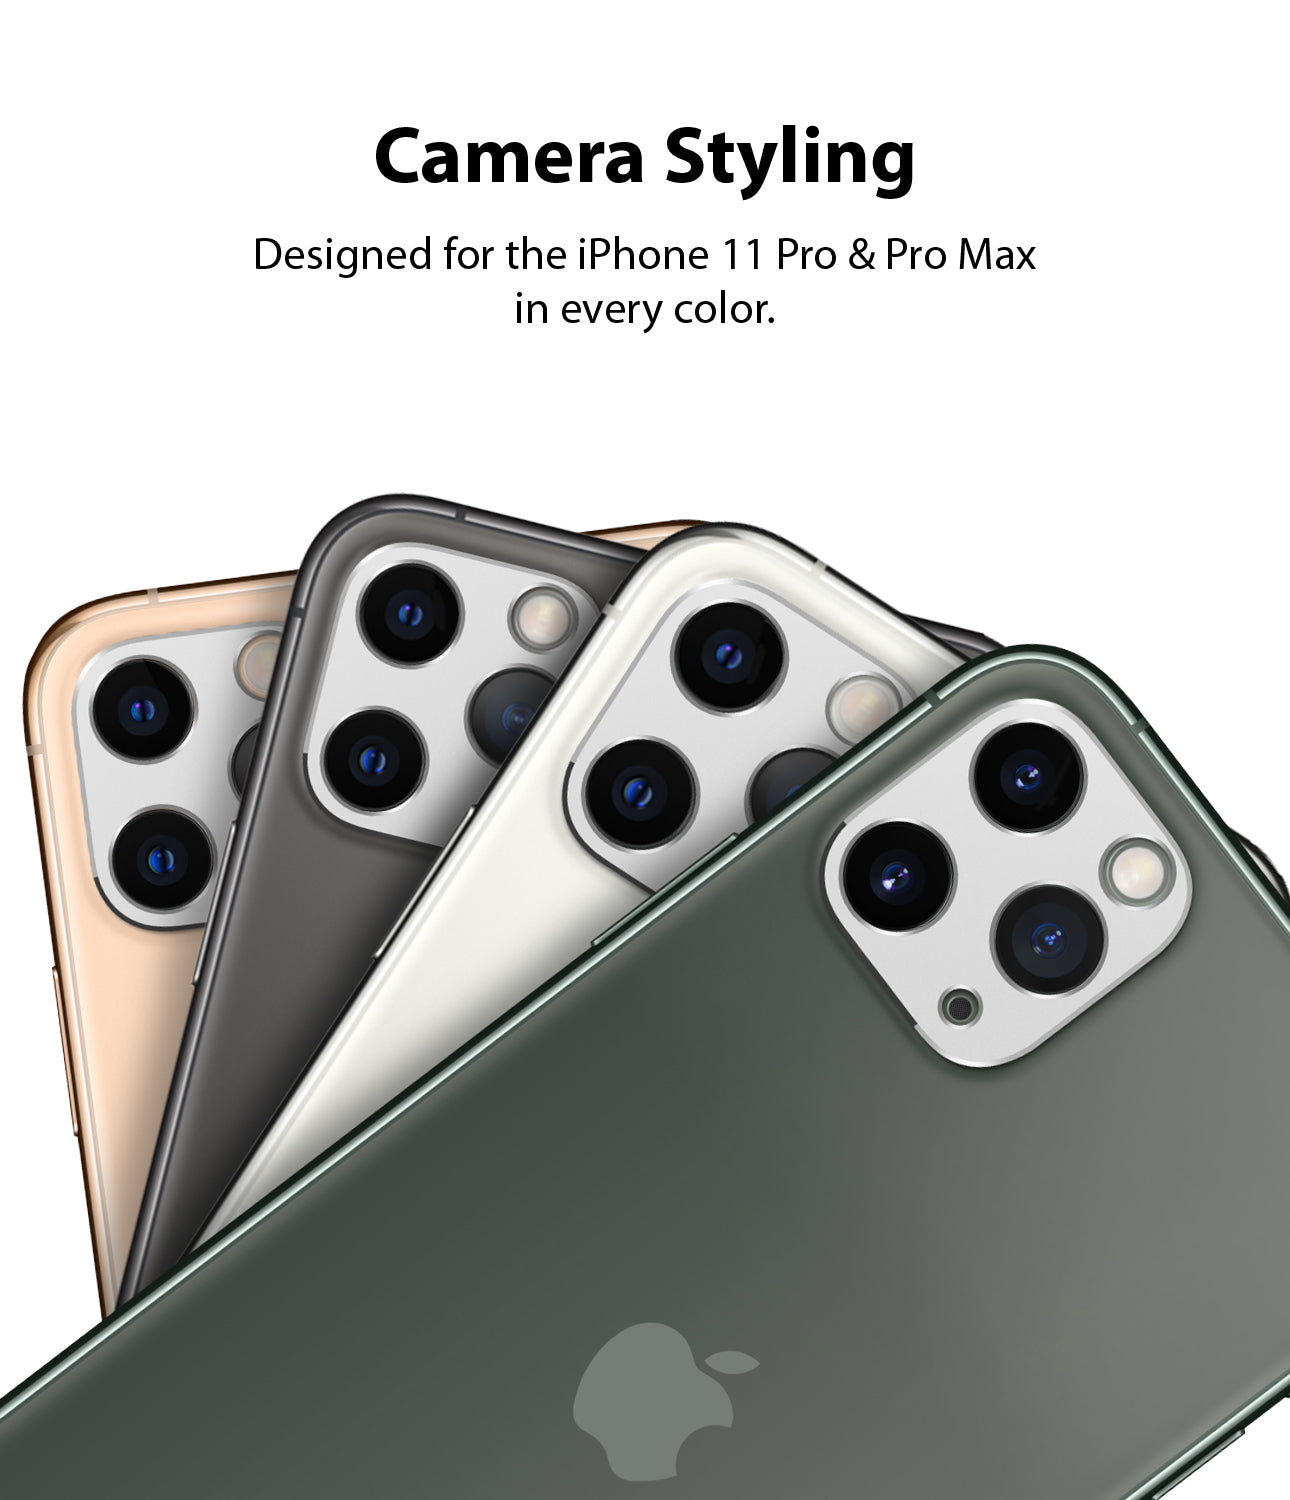 designed for every color of iphone 11 pro / iphone 11 pro max